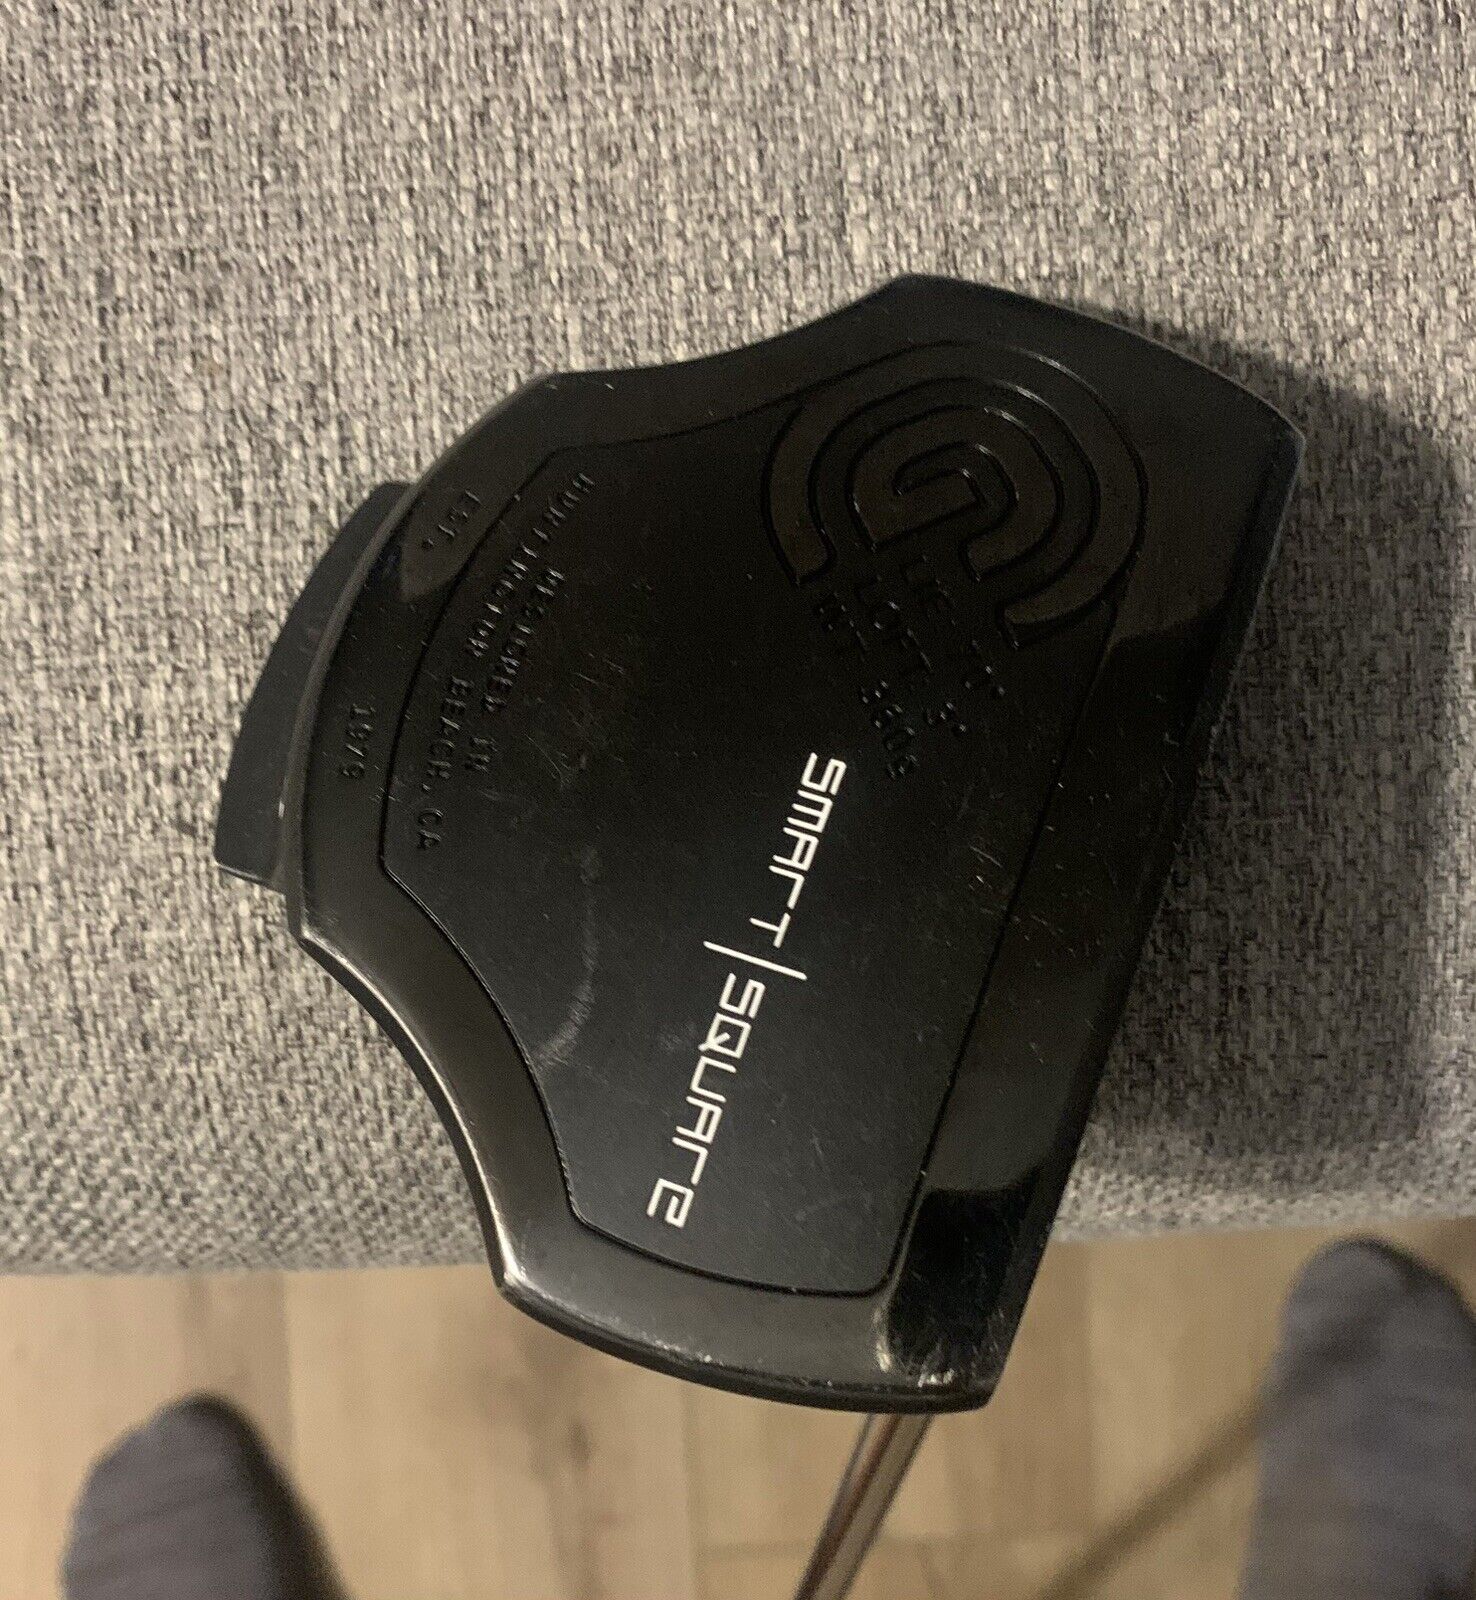 Cleveland Smart Square Center Shafted 360g 33” Putter SuperStroke Claw 2.0